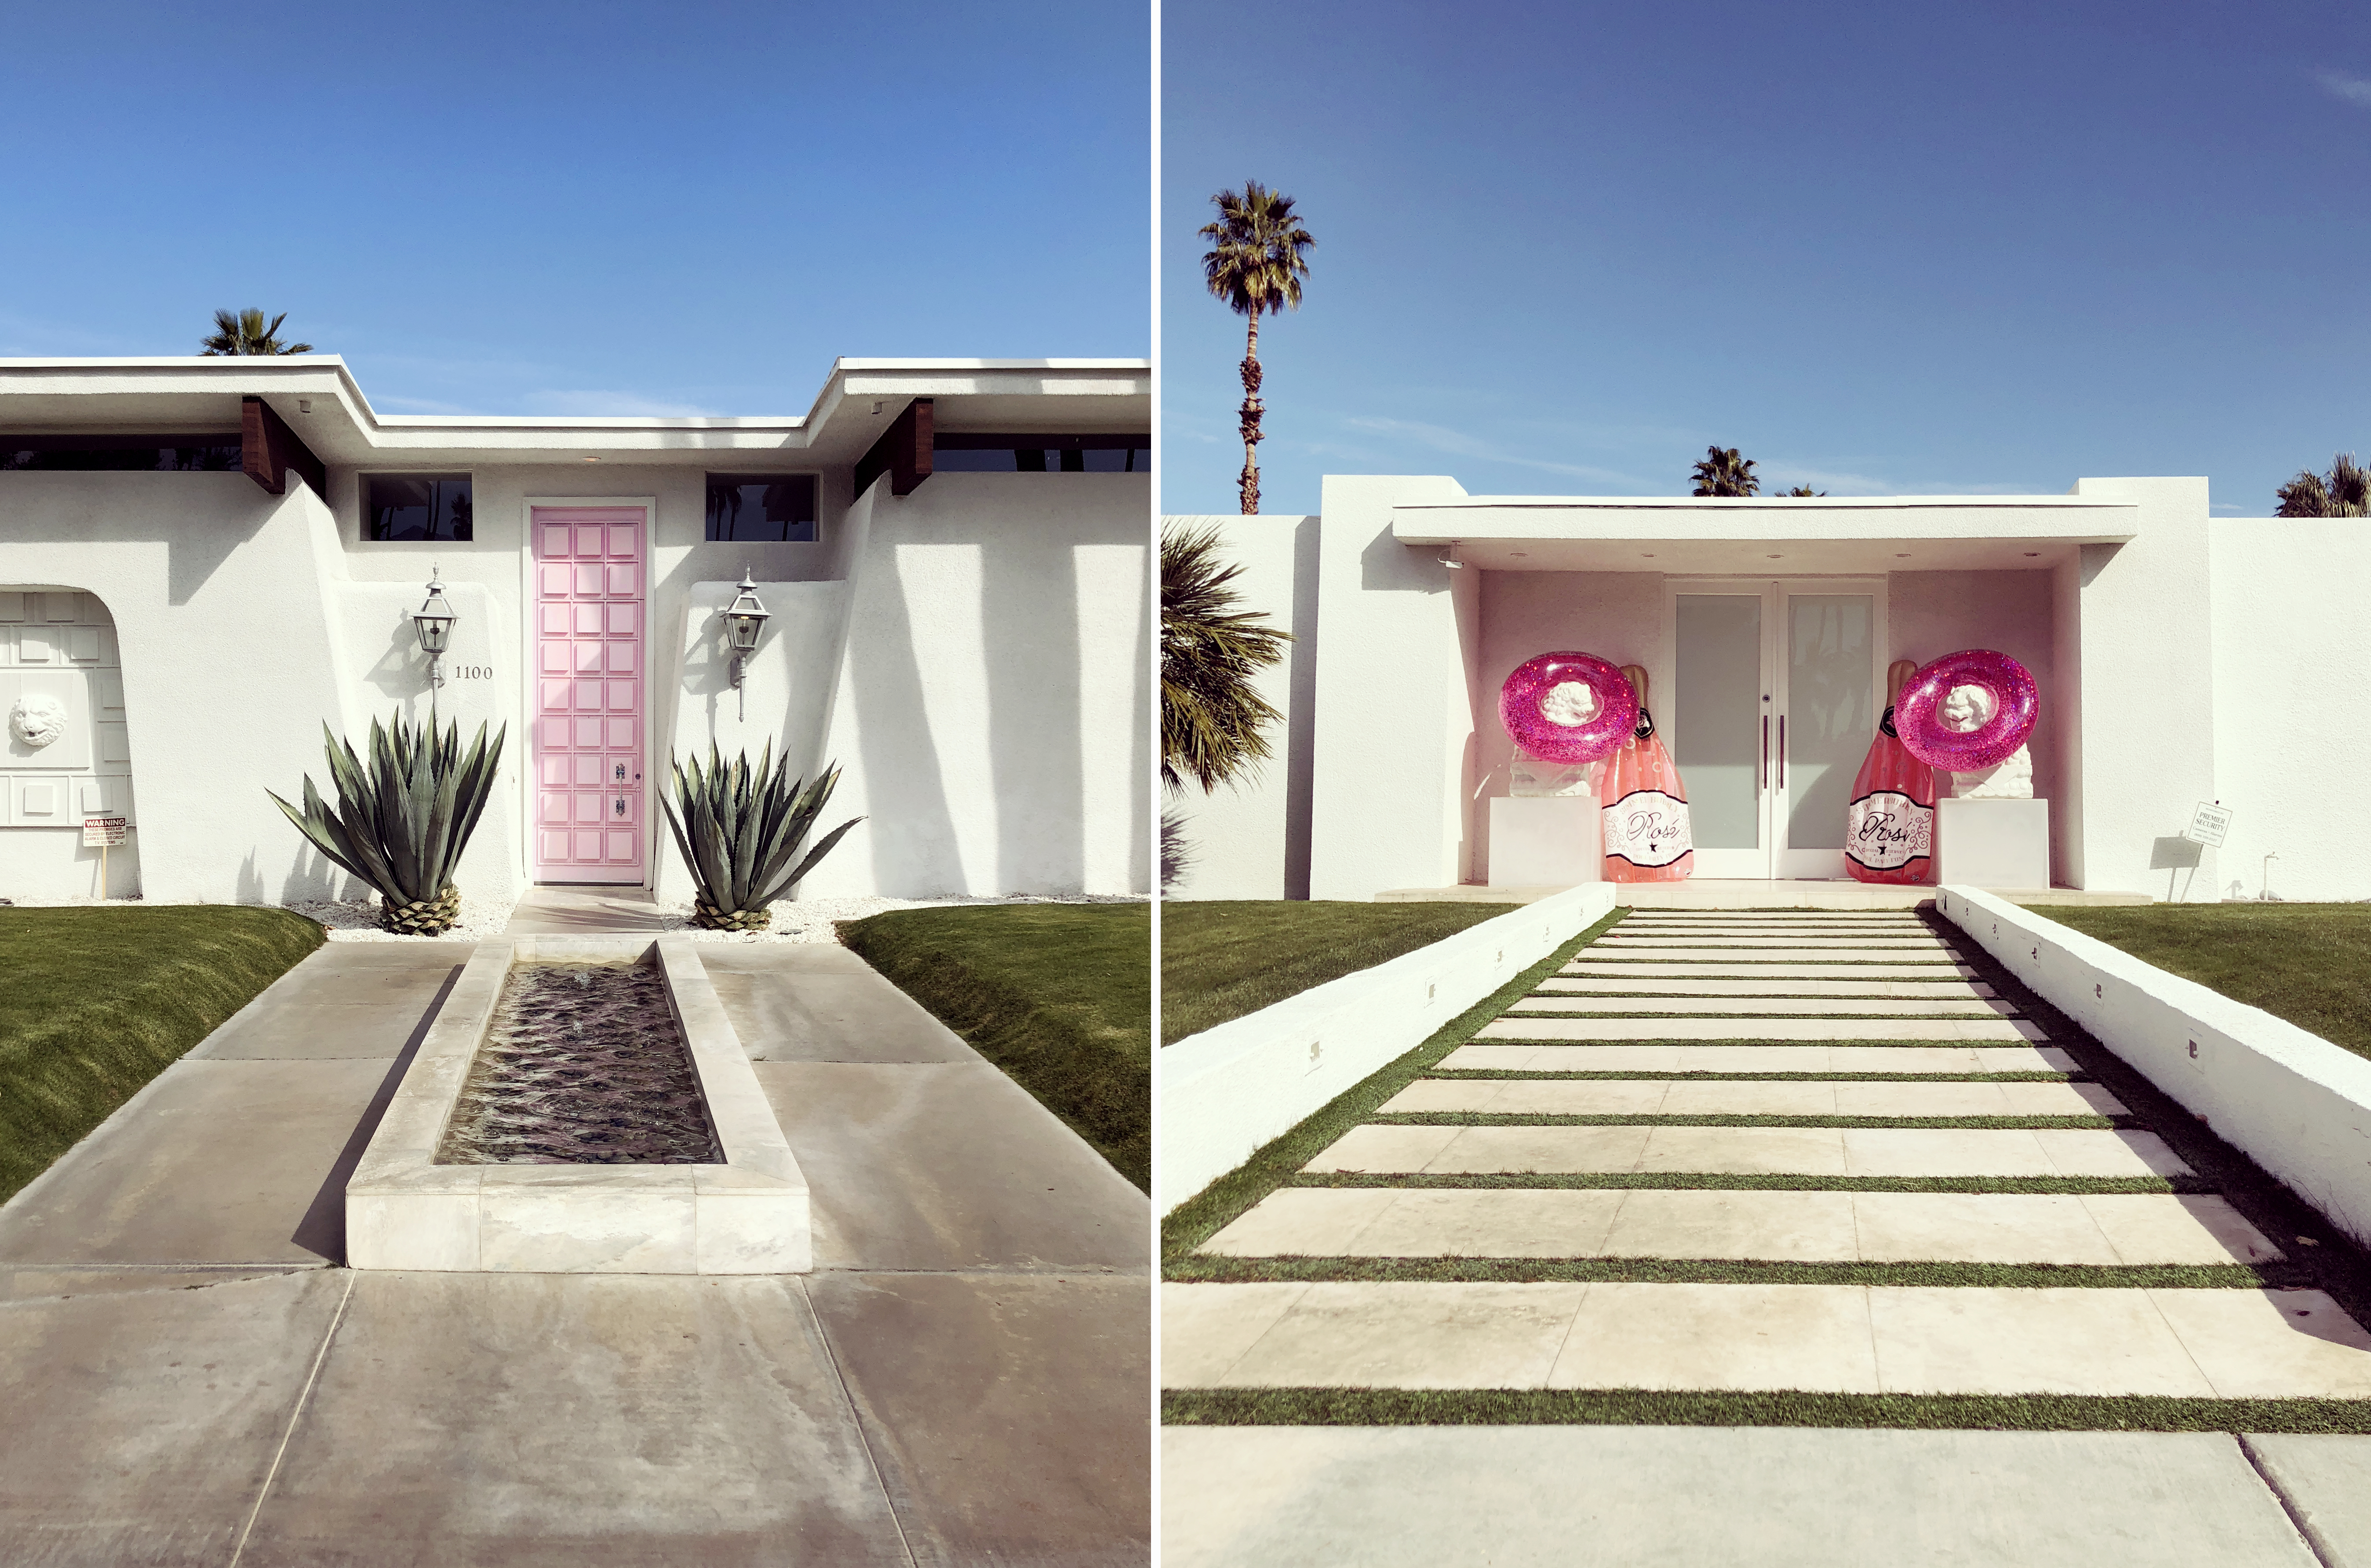 A Trip To Palm Springs For Alt Summit + A Deal! /// By Design Fixation